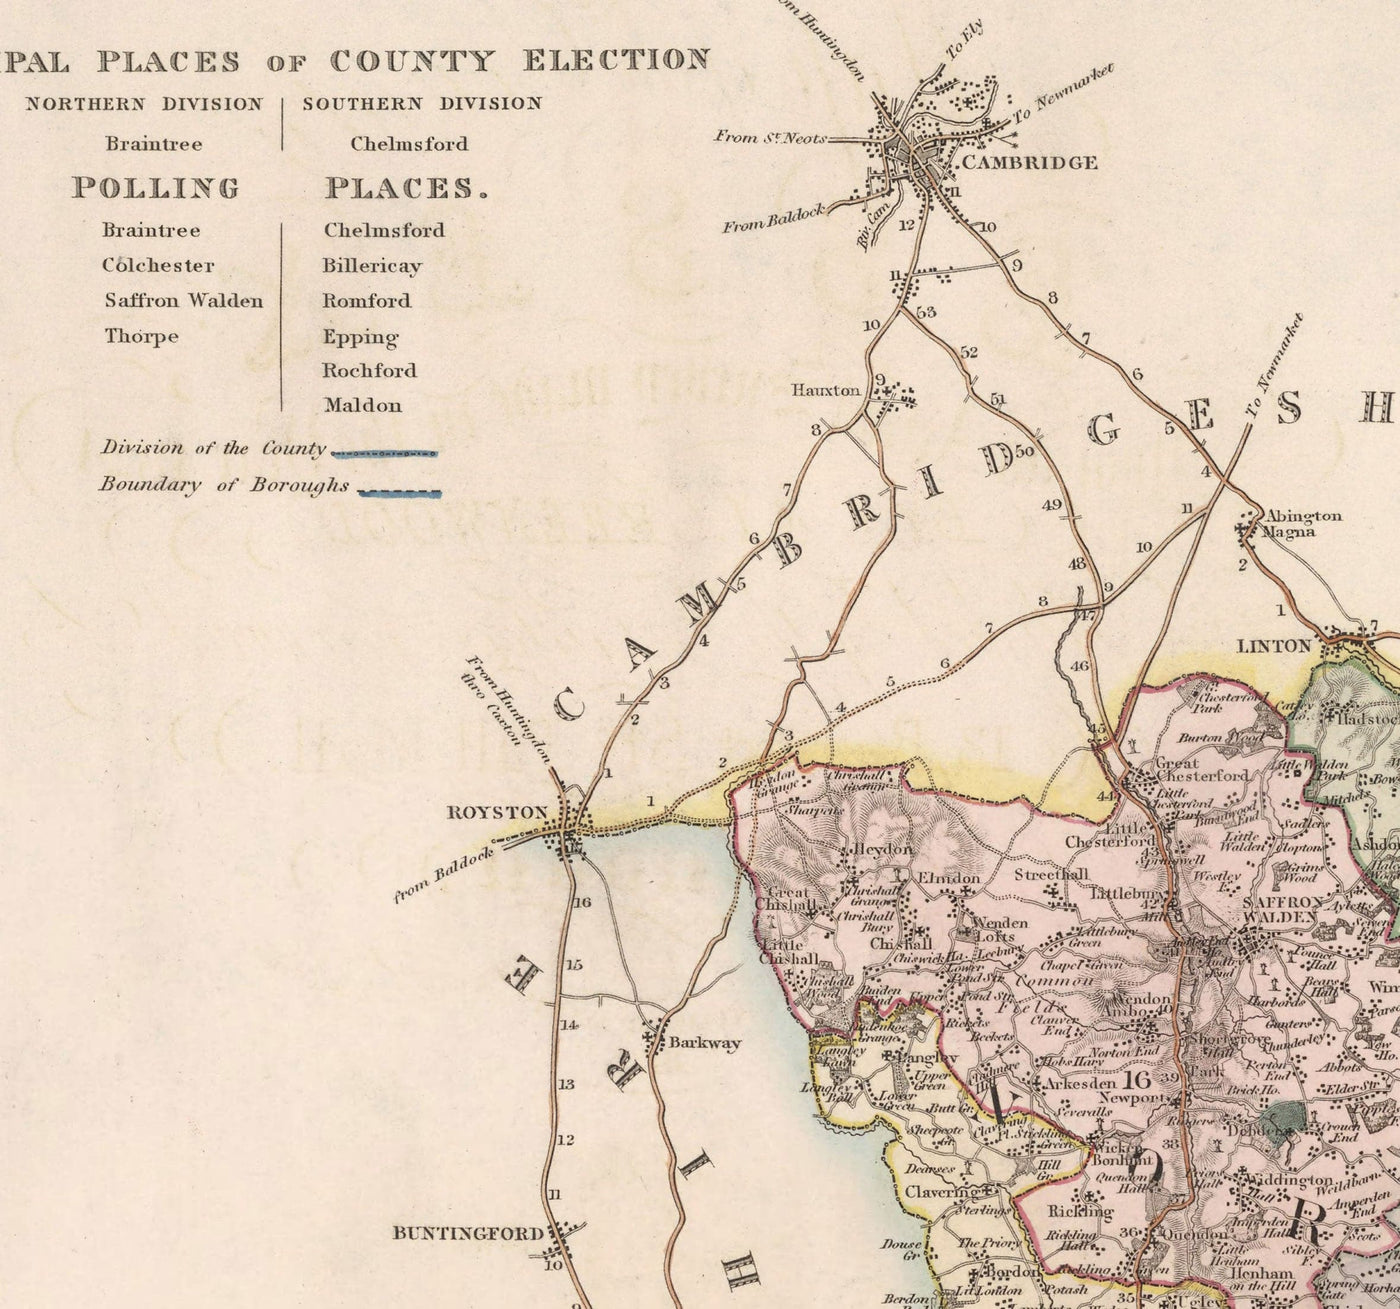 Old Map of Essex, 1831 by Greenwood & Co. - Southend, Colchester, Chelmsford, Romford, Dagenham, Brentwood, Basildon